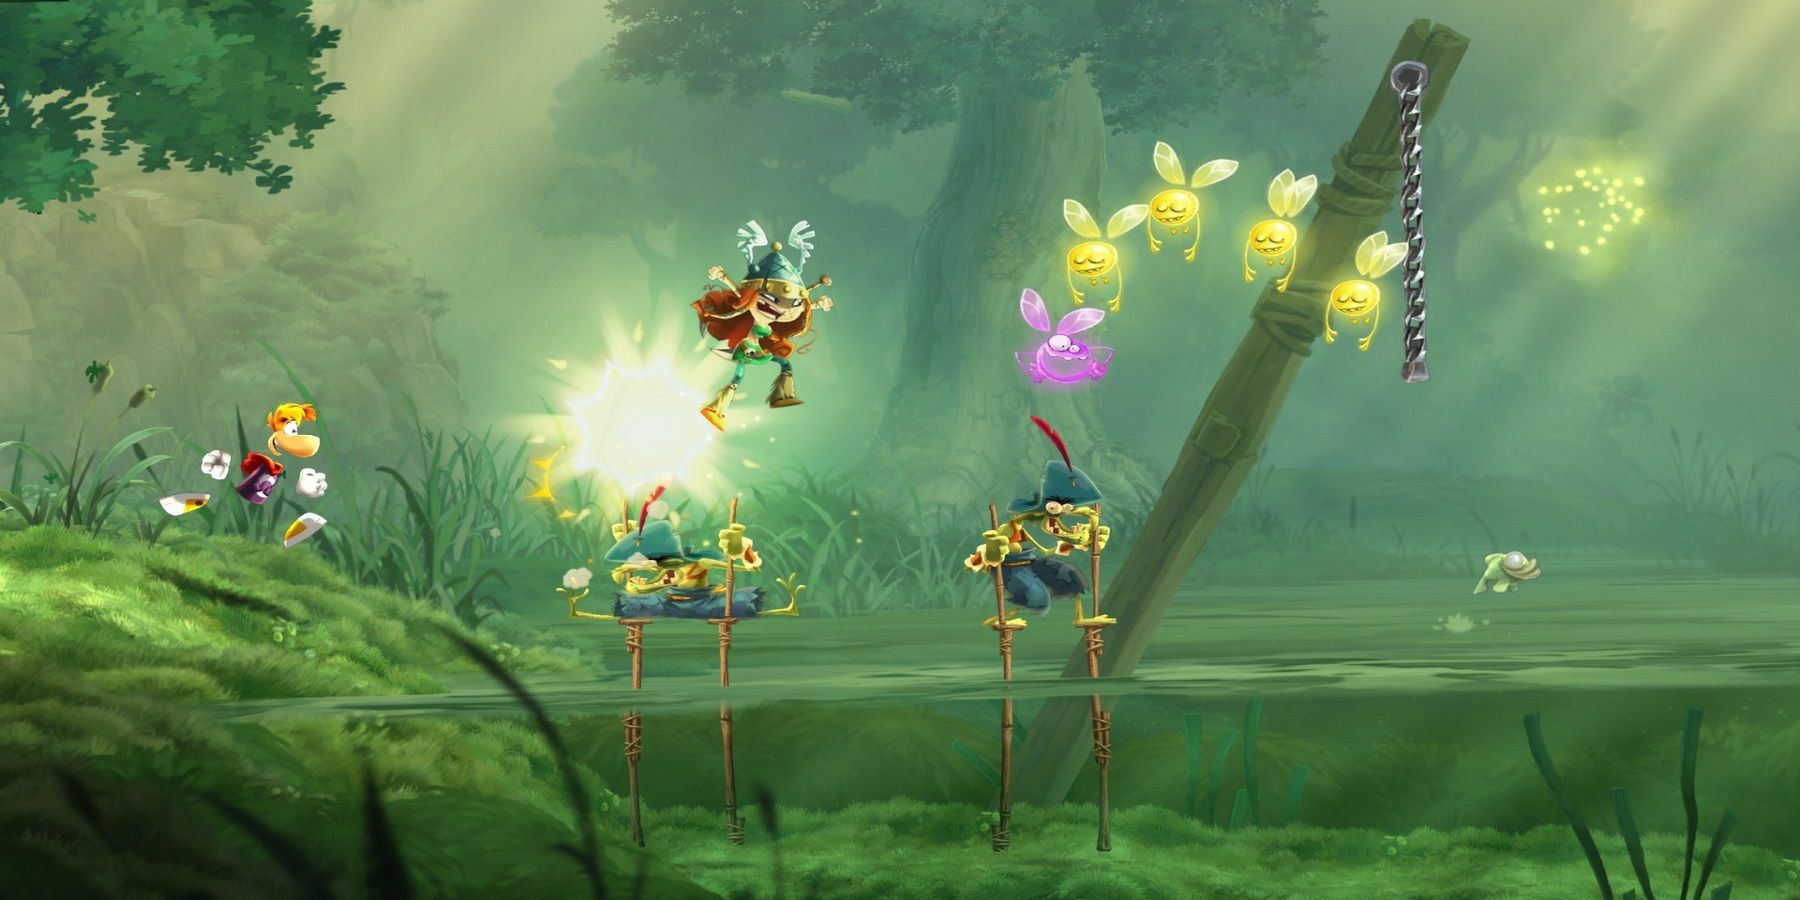 Rayman Legends one player jumping on an enemy while the other runs behind them